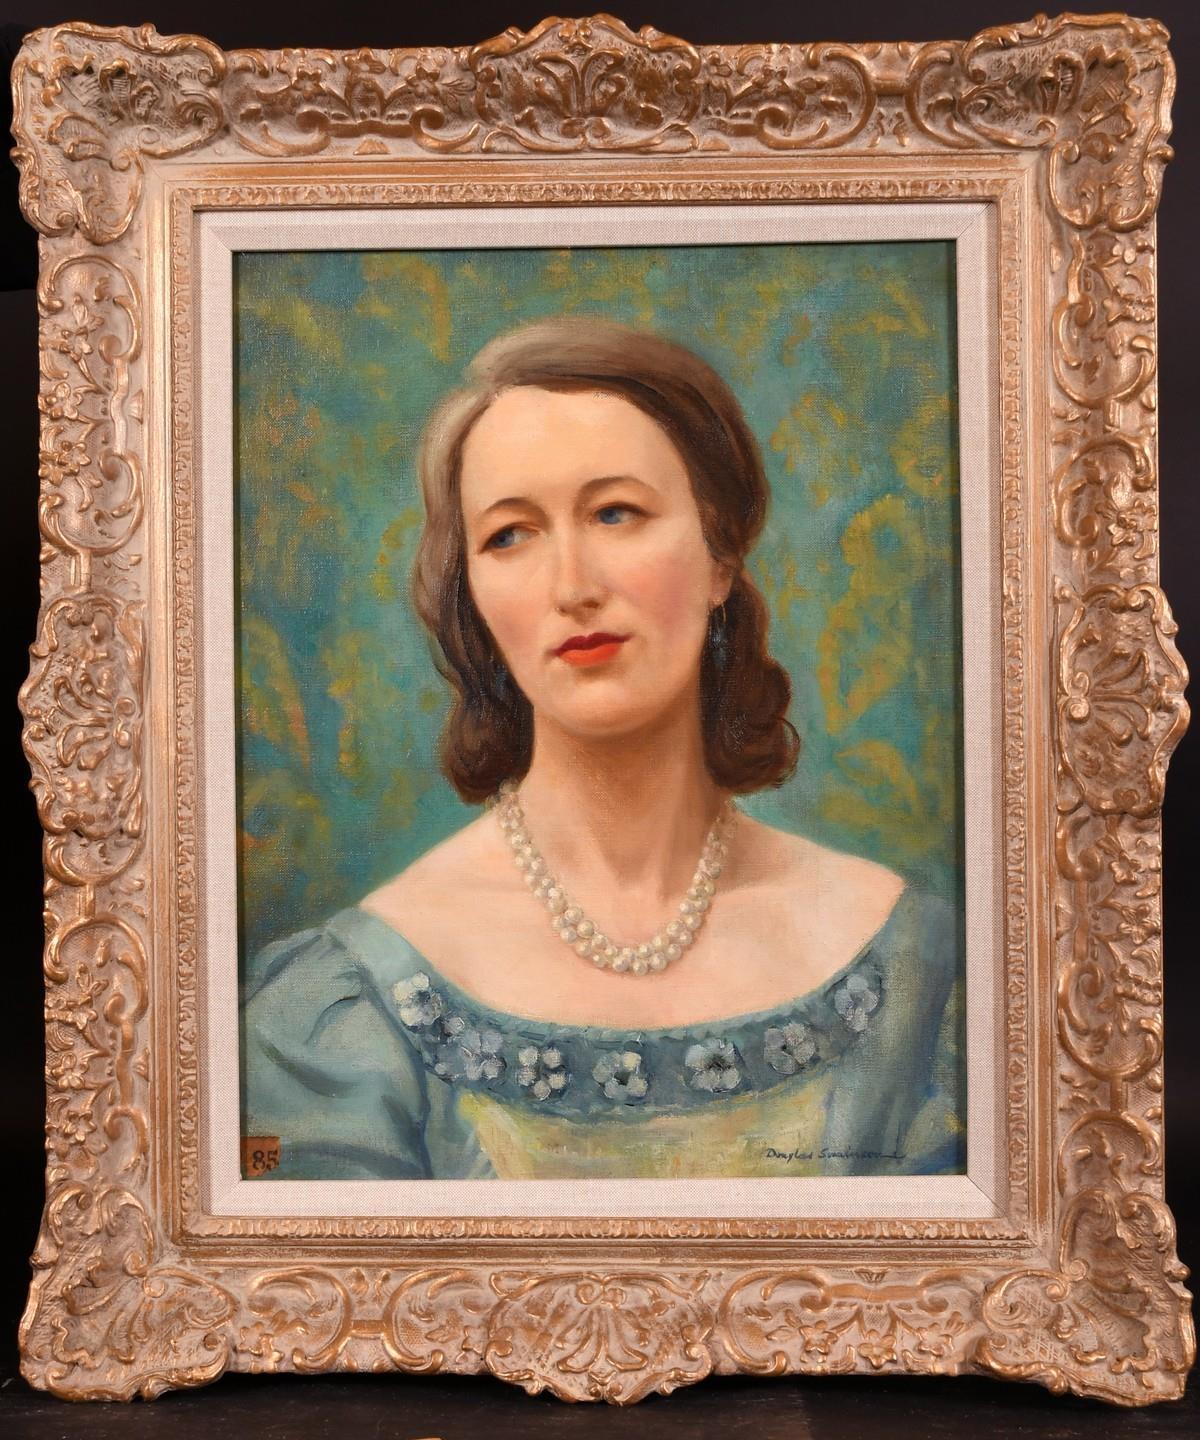 MID 20th CENTURY BRITISH OIL - PORTRAIT OF A LADY IN PEARL NECKLACE - TEAL GREEN - Painting by Douglas Swainson